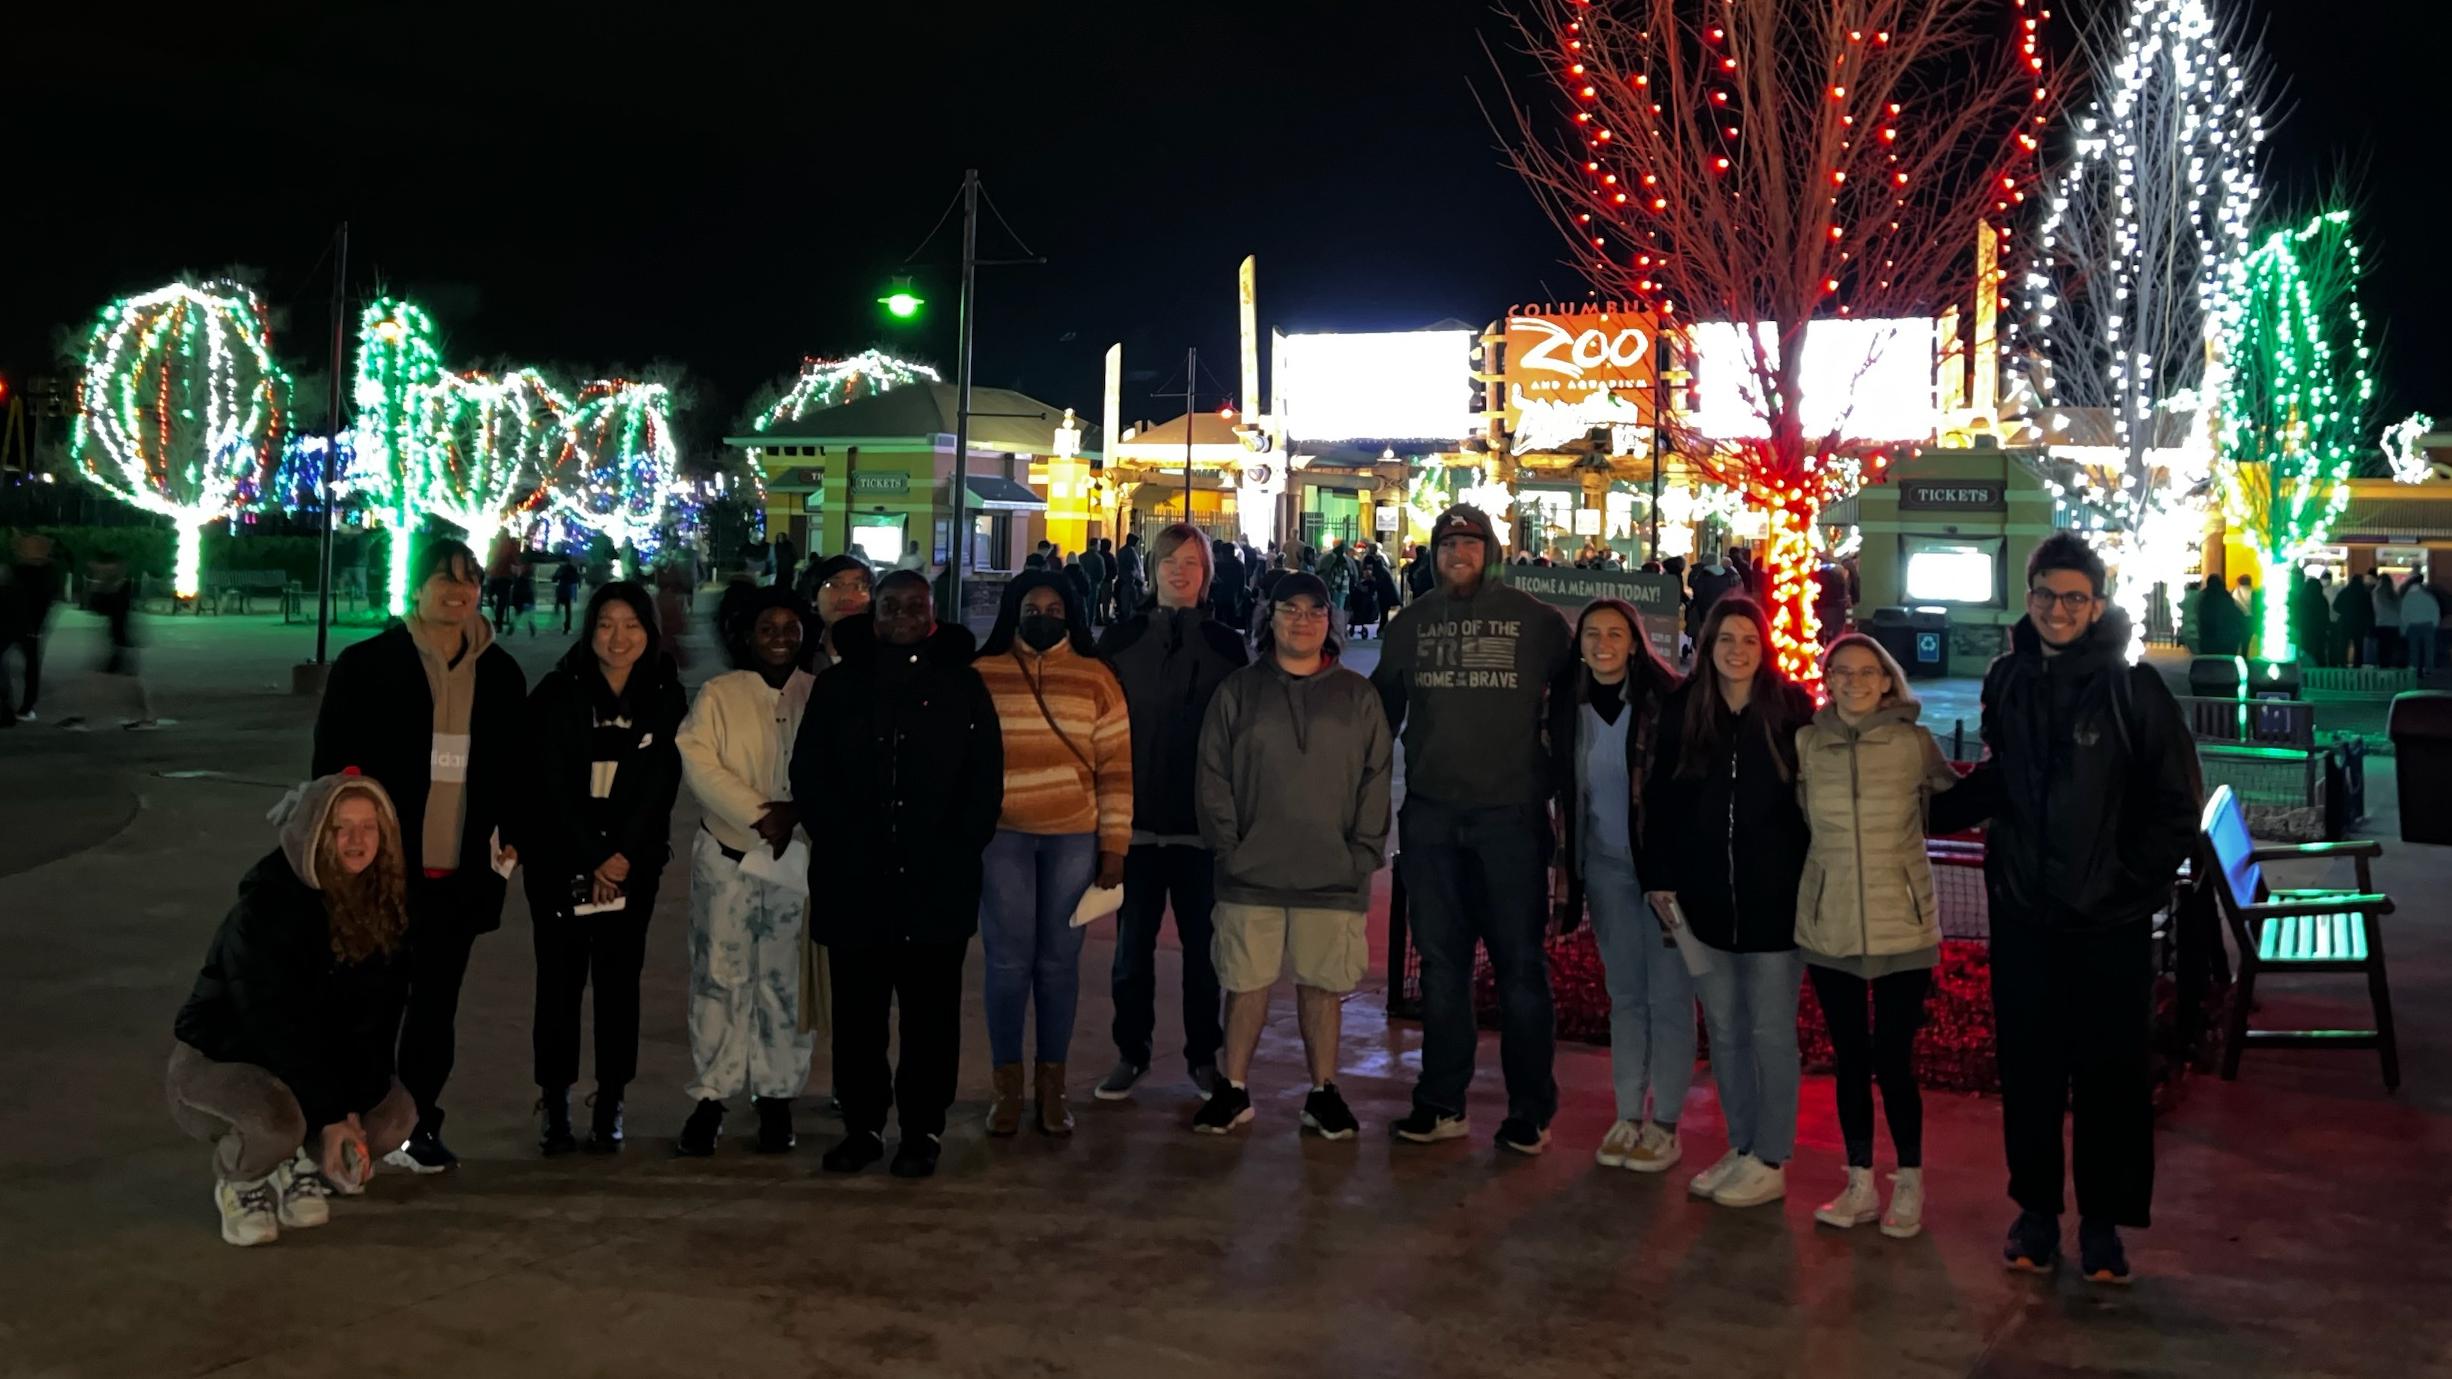 Students stand in front of trees lit for Christmas at the Columbus Zoo and Aquarium.